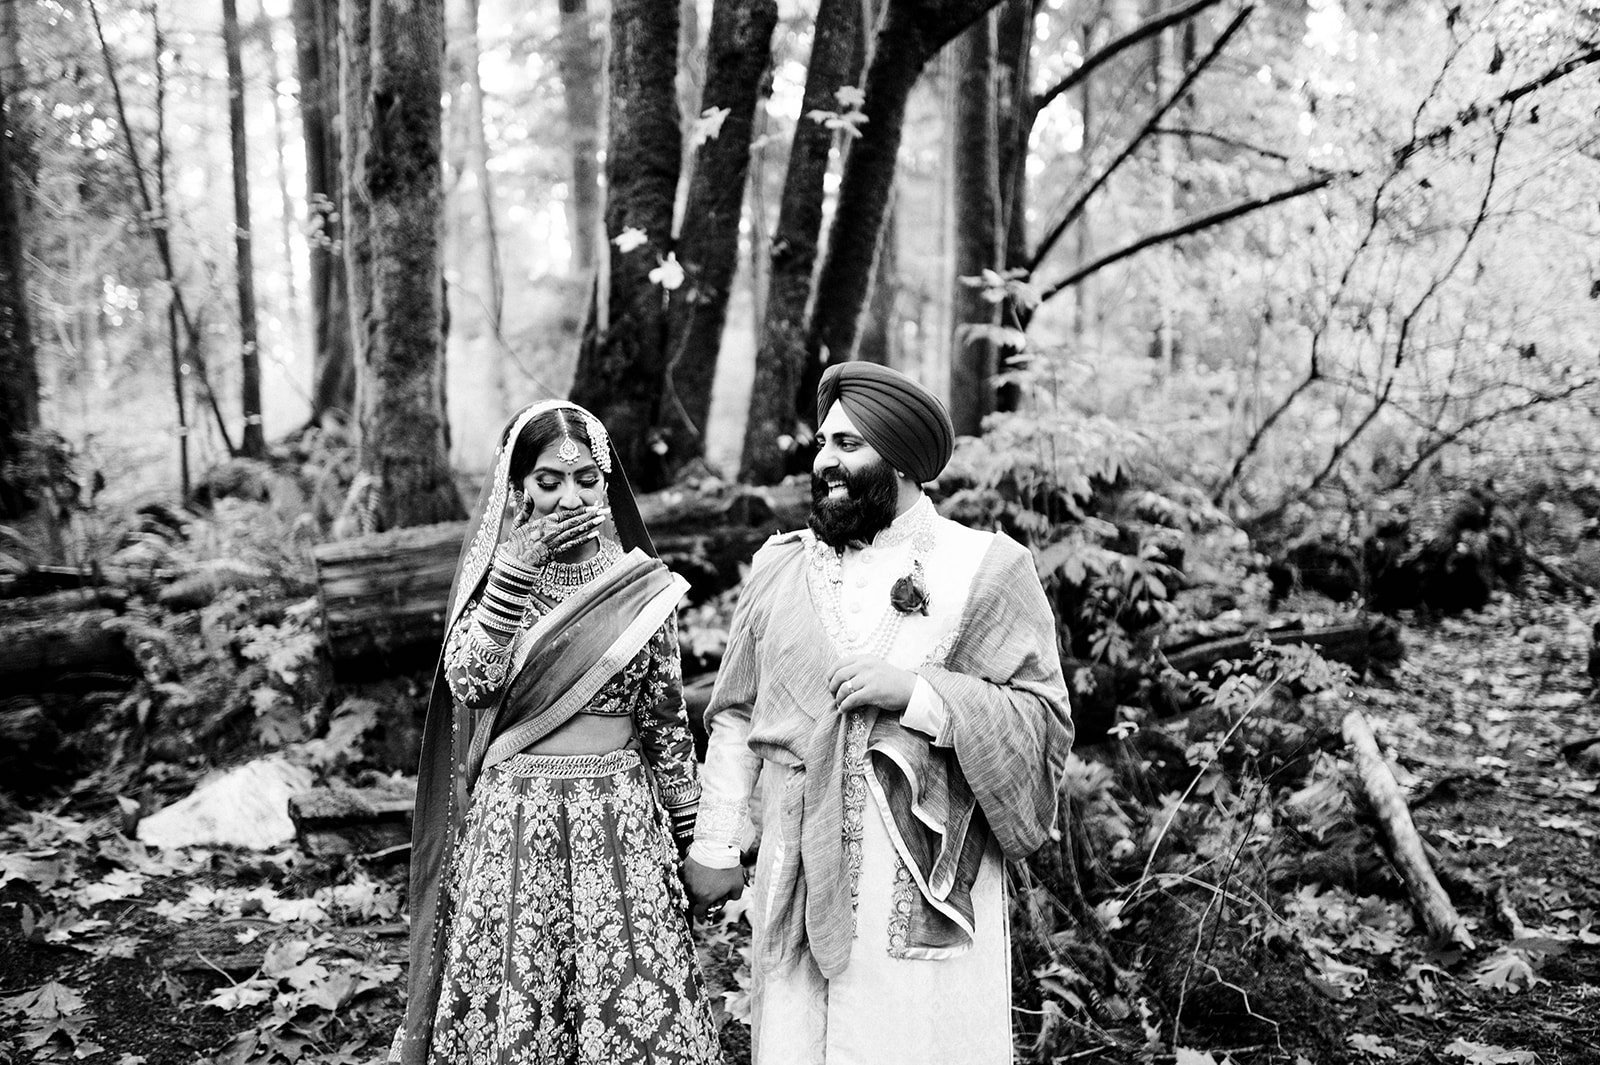 A south Asian bride laughs at her groom as they stroll through the forest in Stanley Park